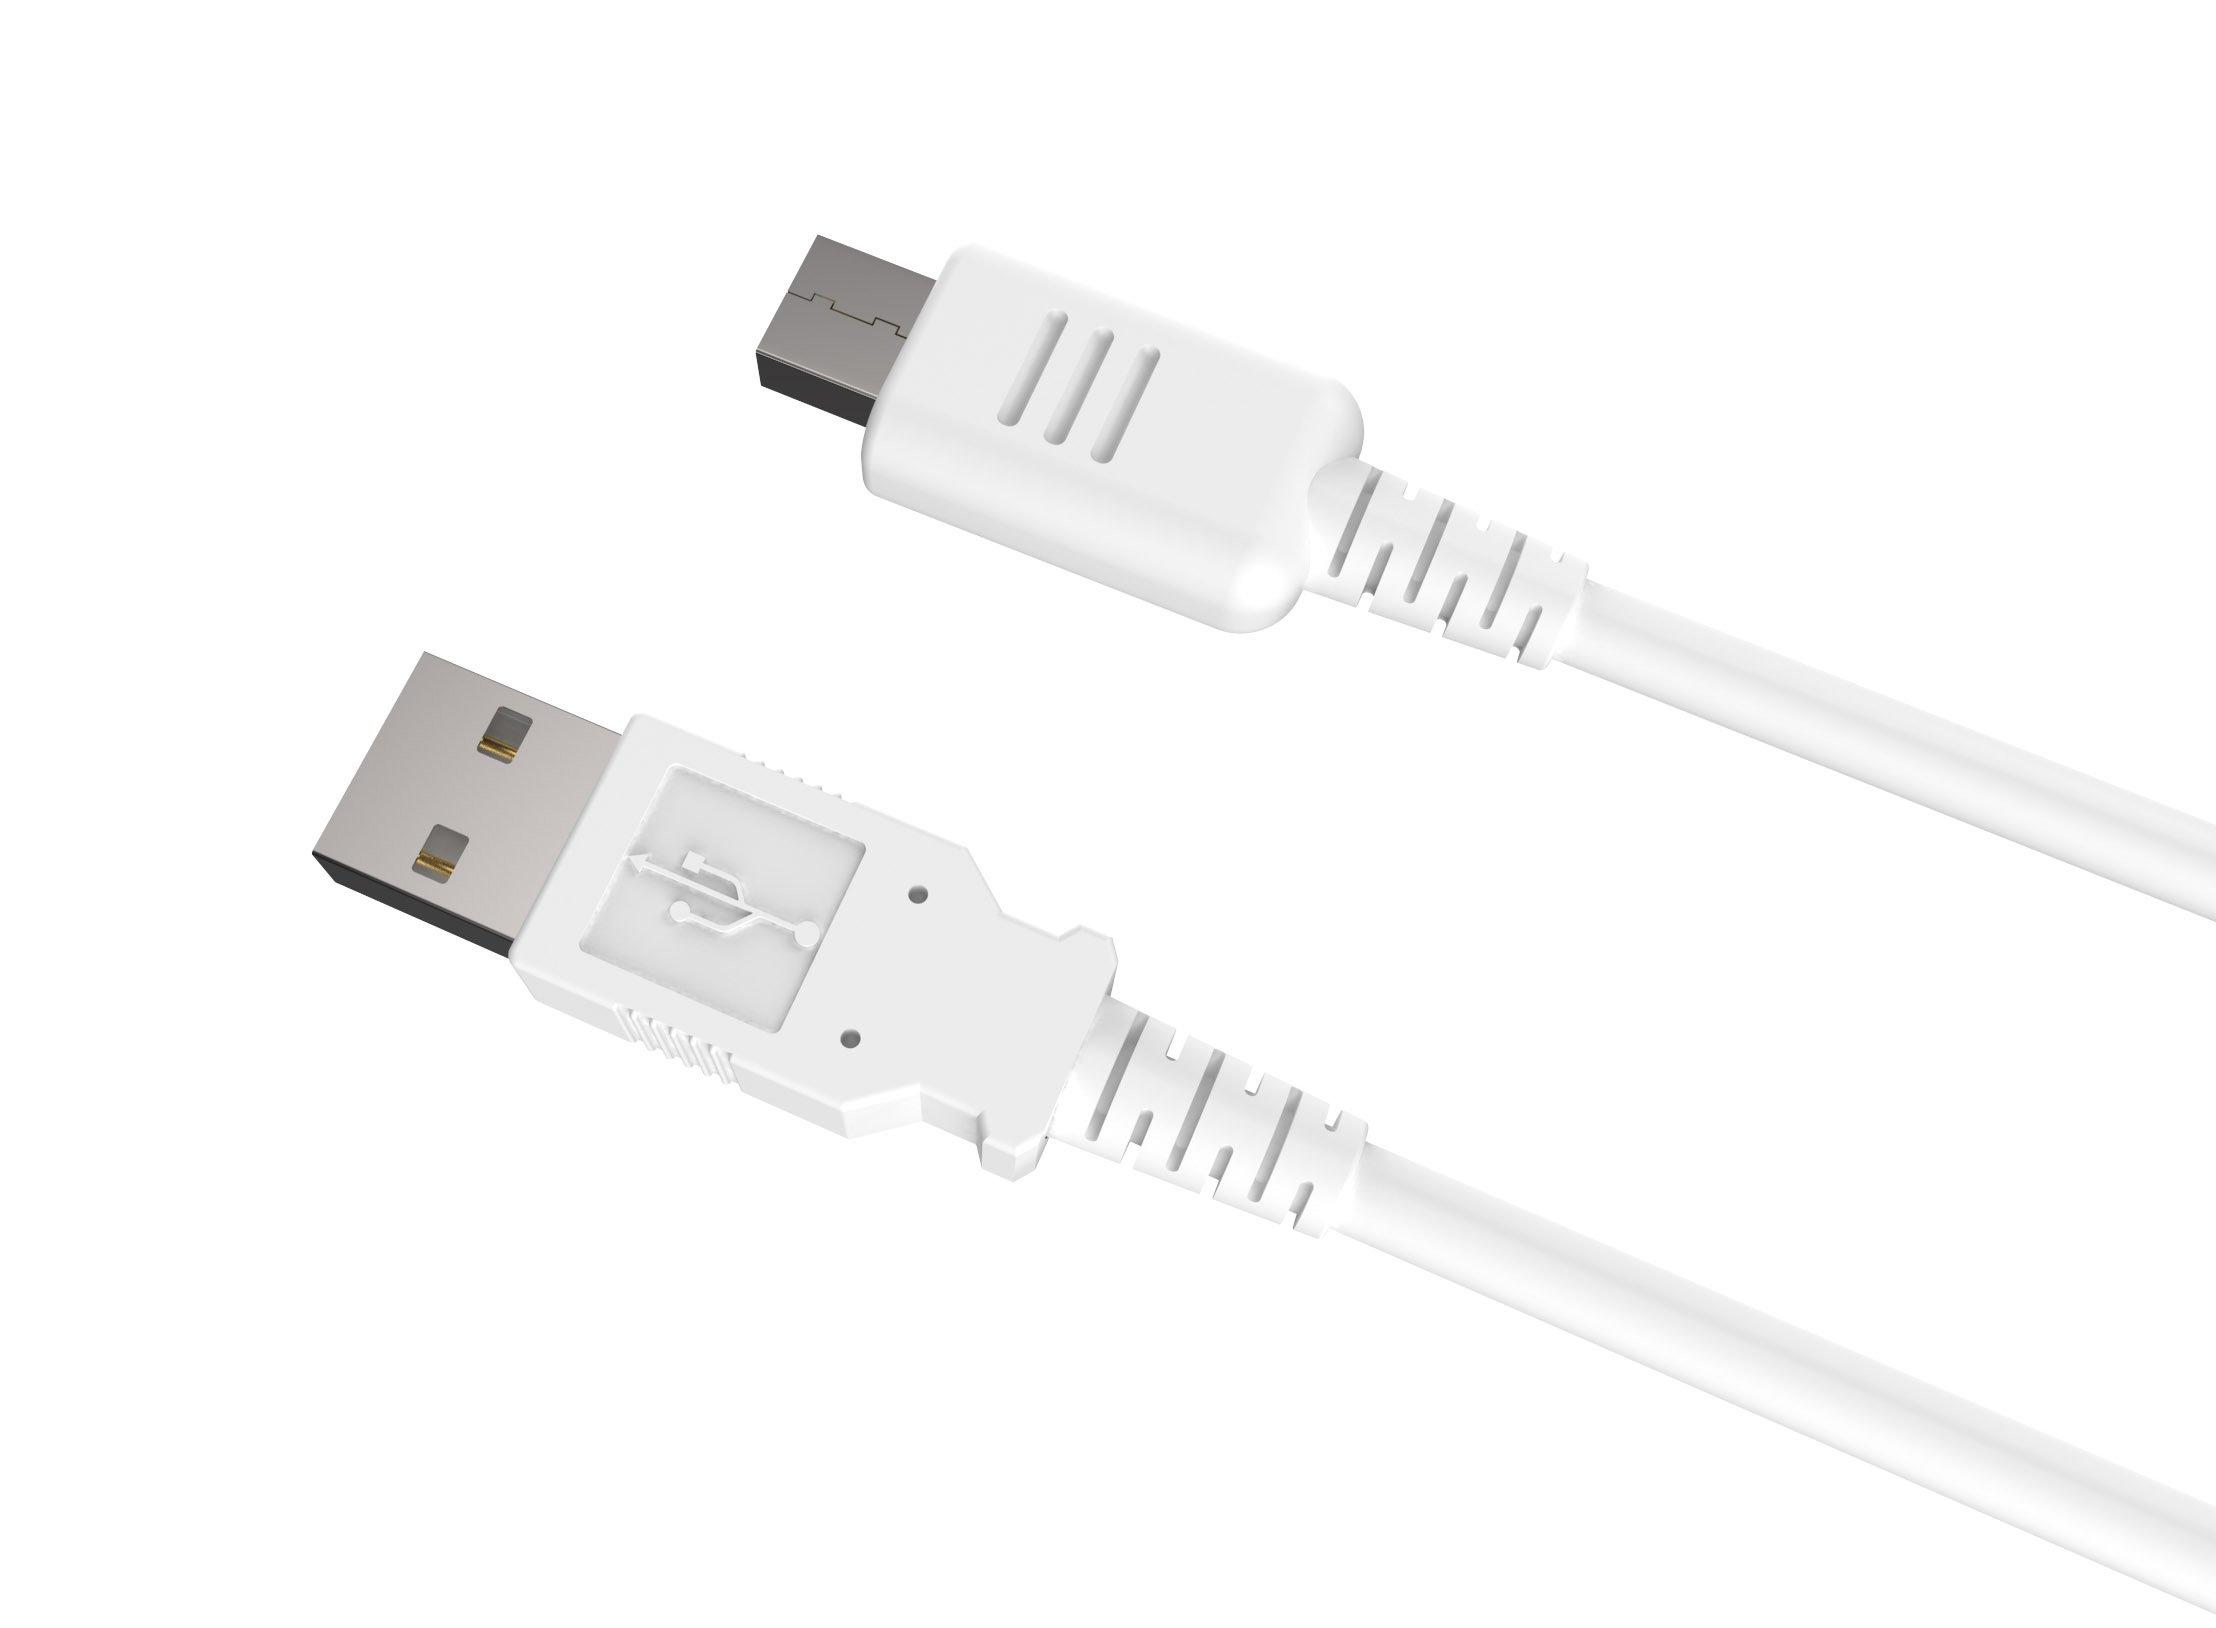 list item 3 of 3 Tablet Charge Cable for Nintendo Wii U